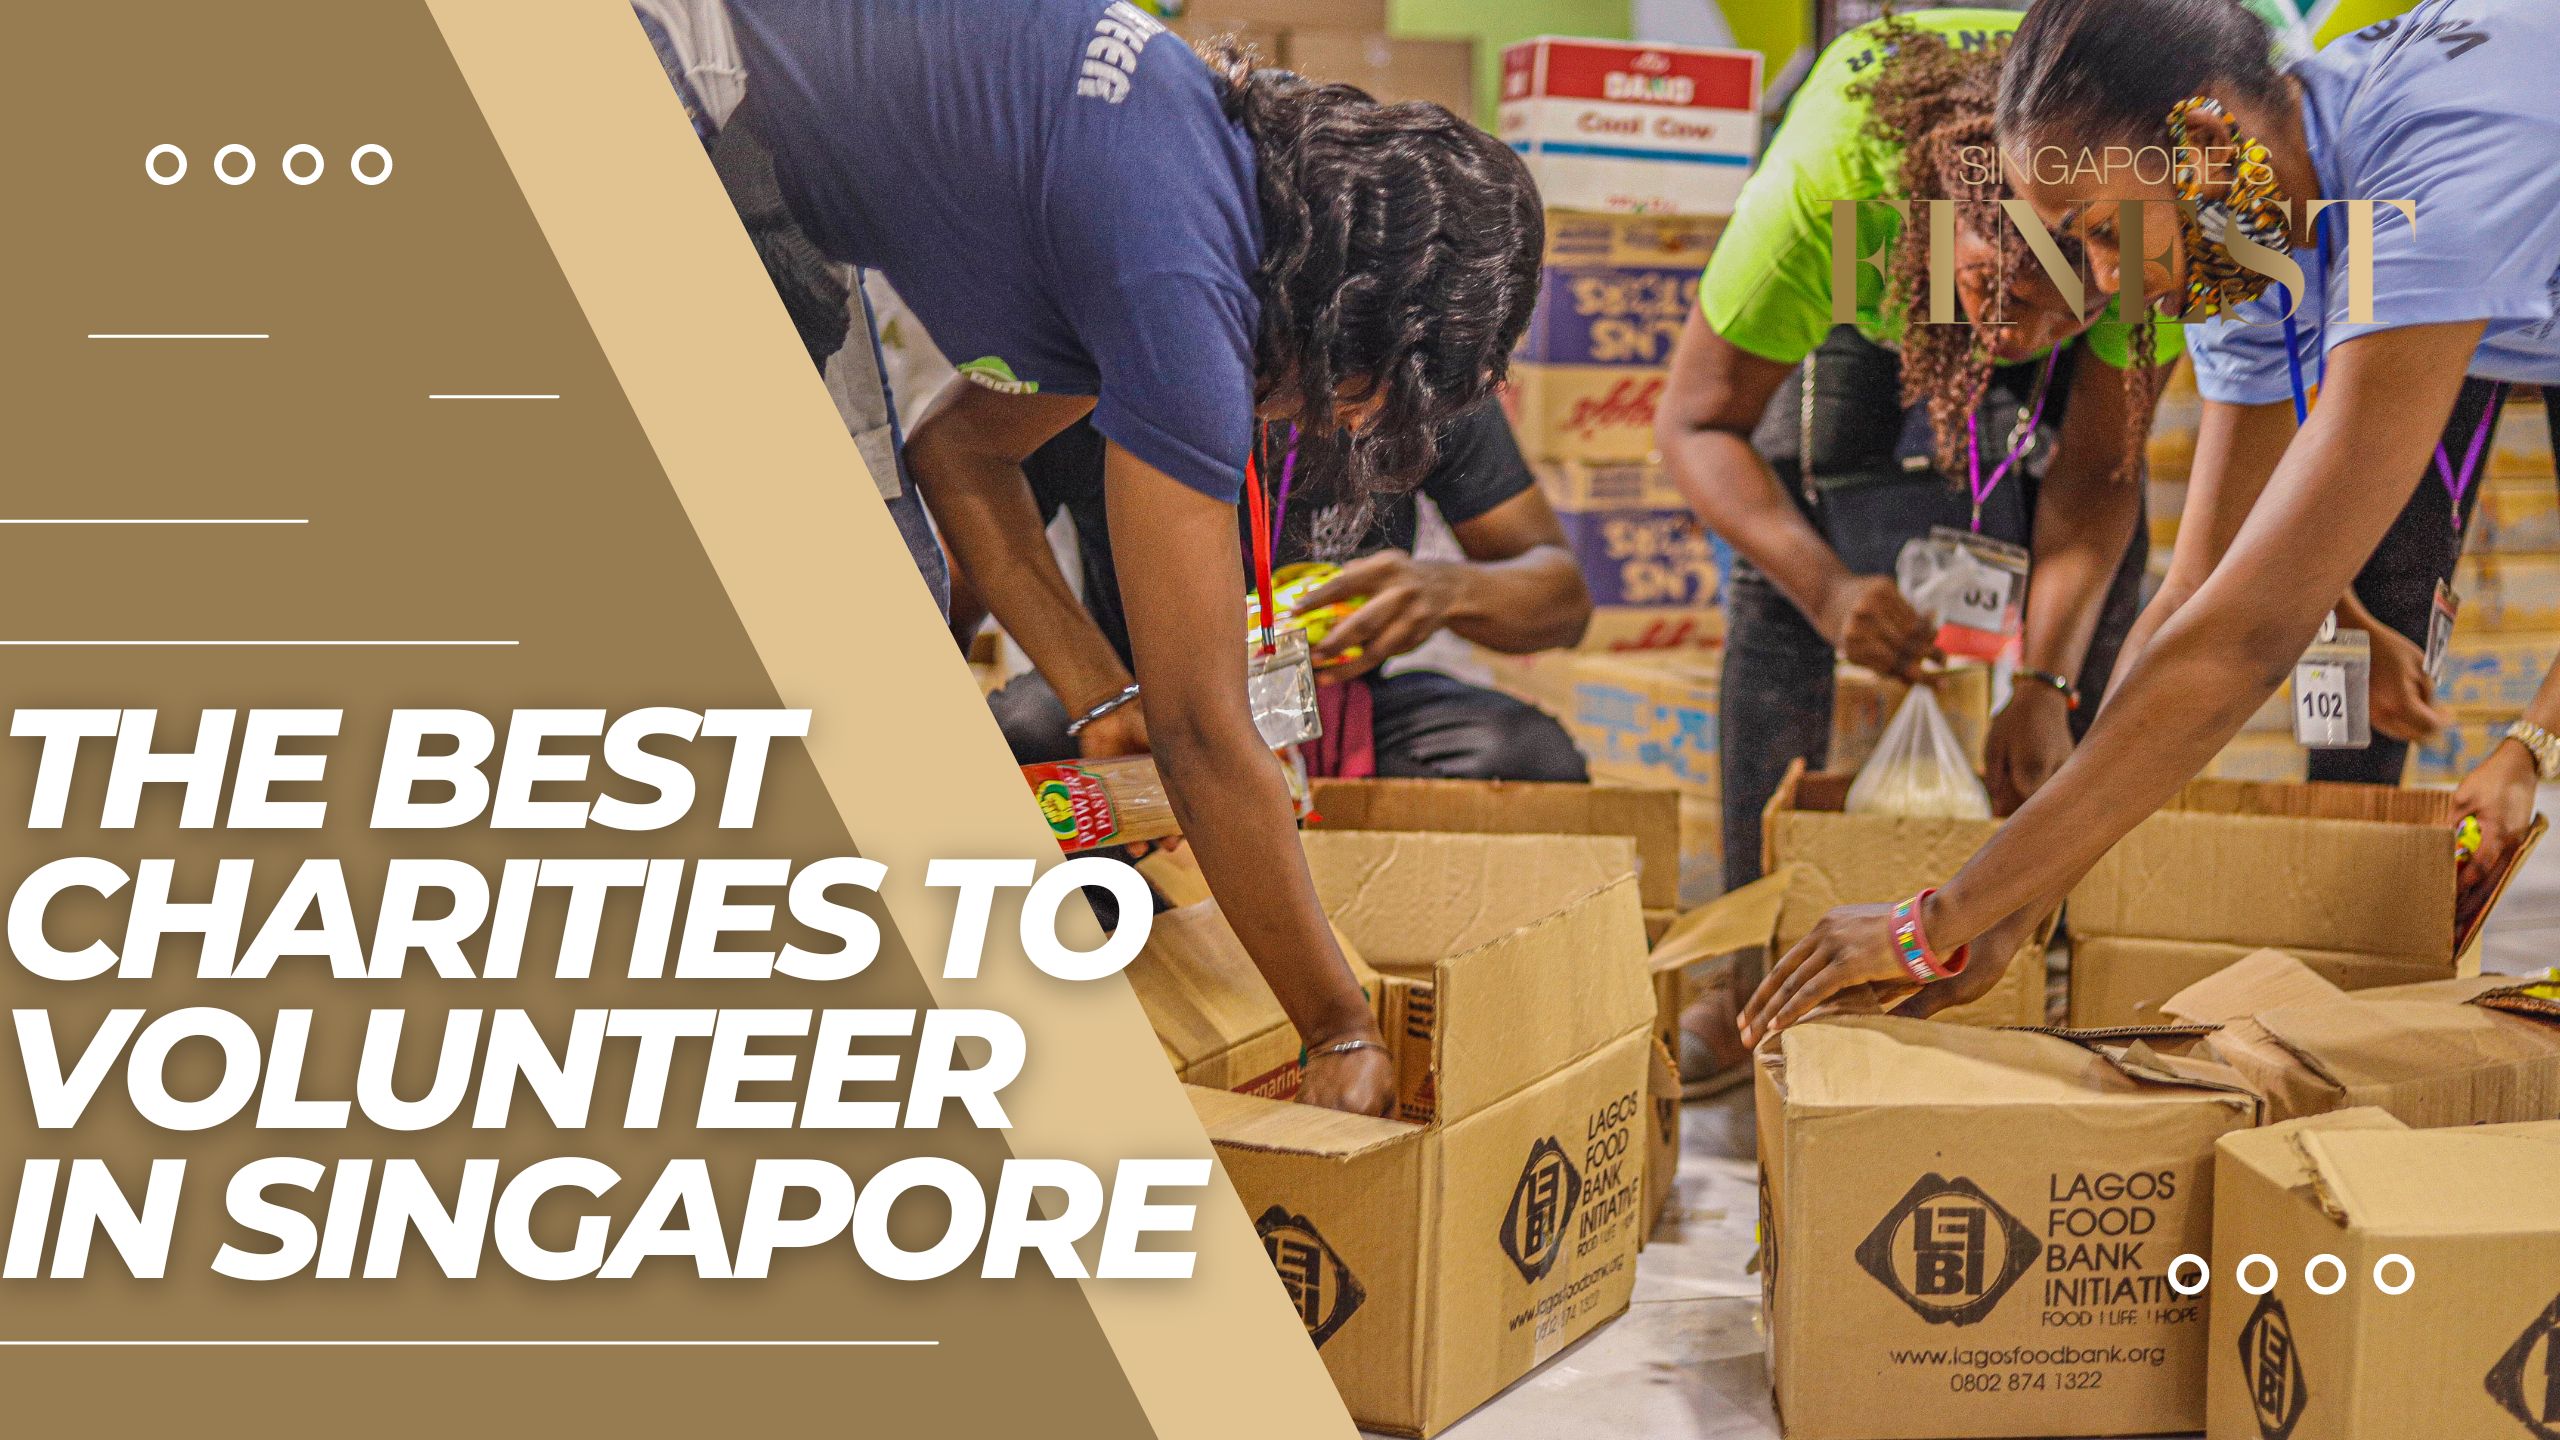 The Finest Charities to Volunteer in Singapore